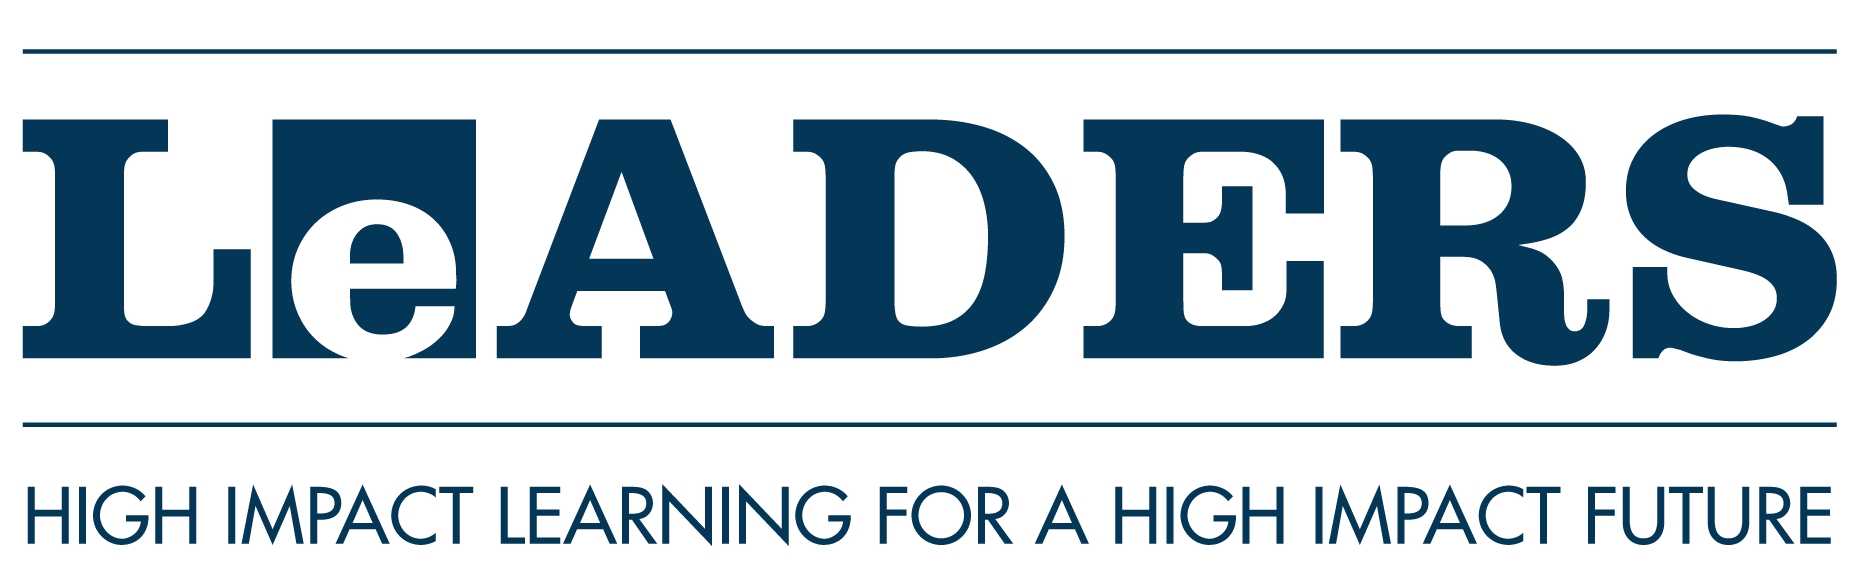 LeADERS Logo with Tagline